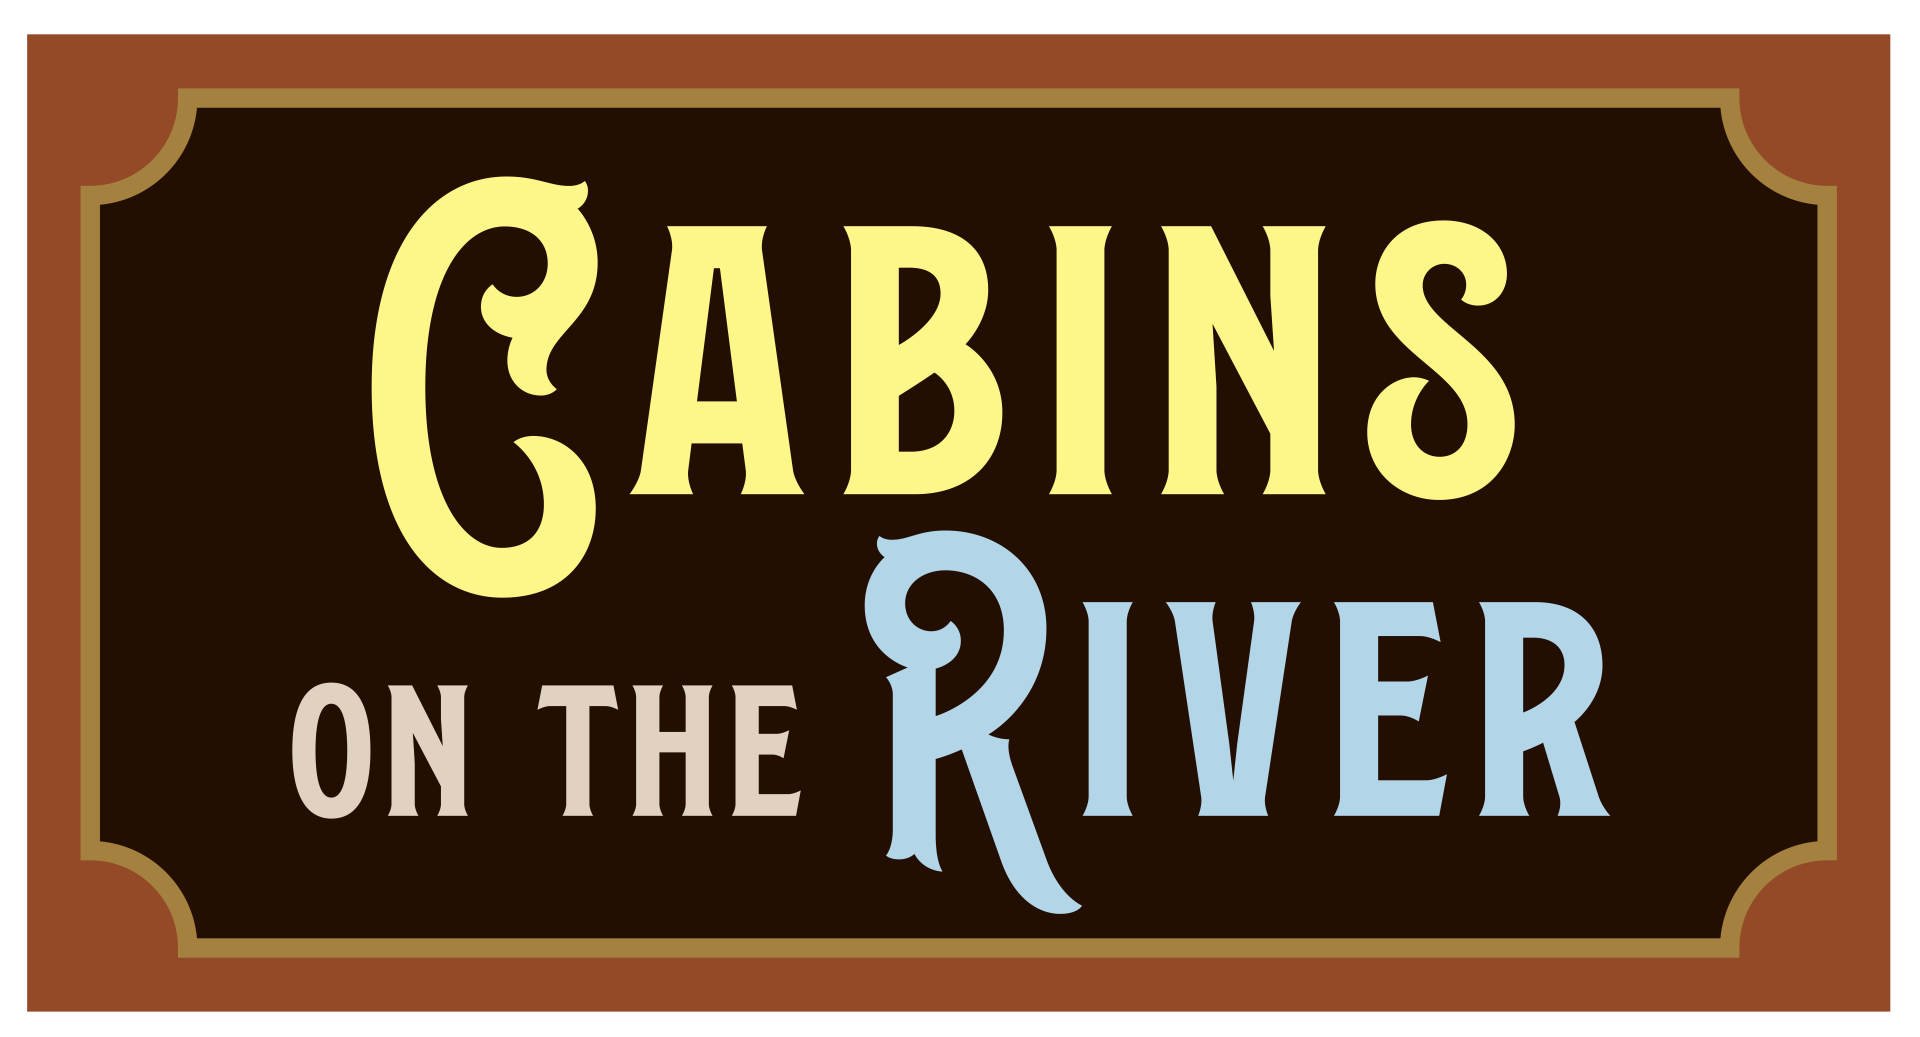 Cabins on the river sign